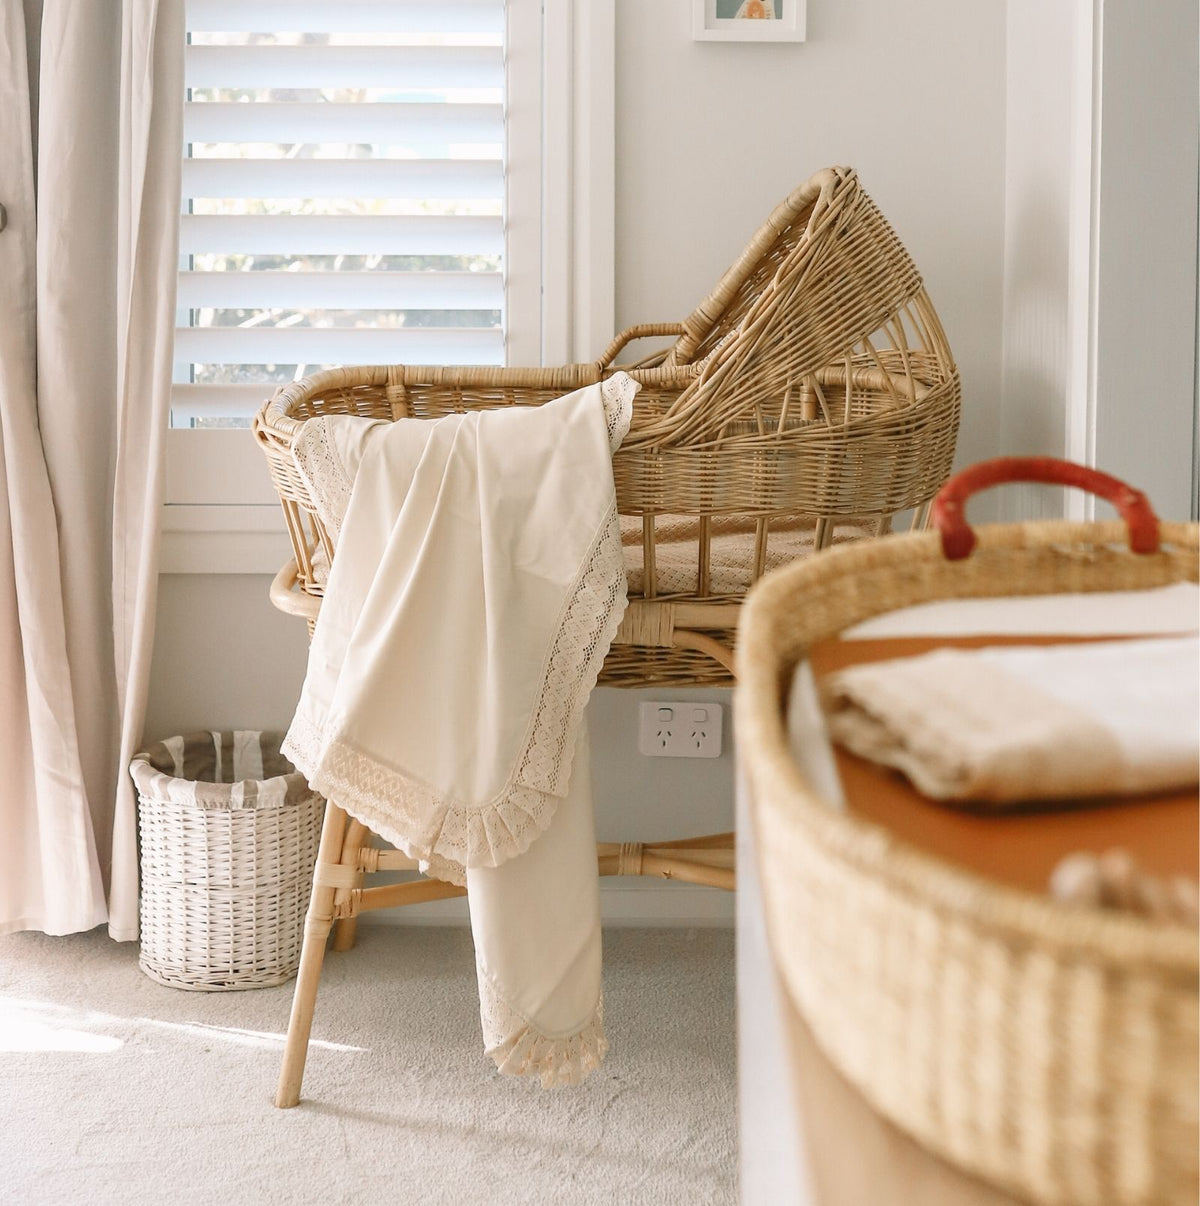 Cream coloured lace edged baby blanket hanging over a wicker vintage bassinet in baby nursery